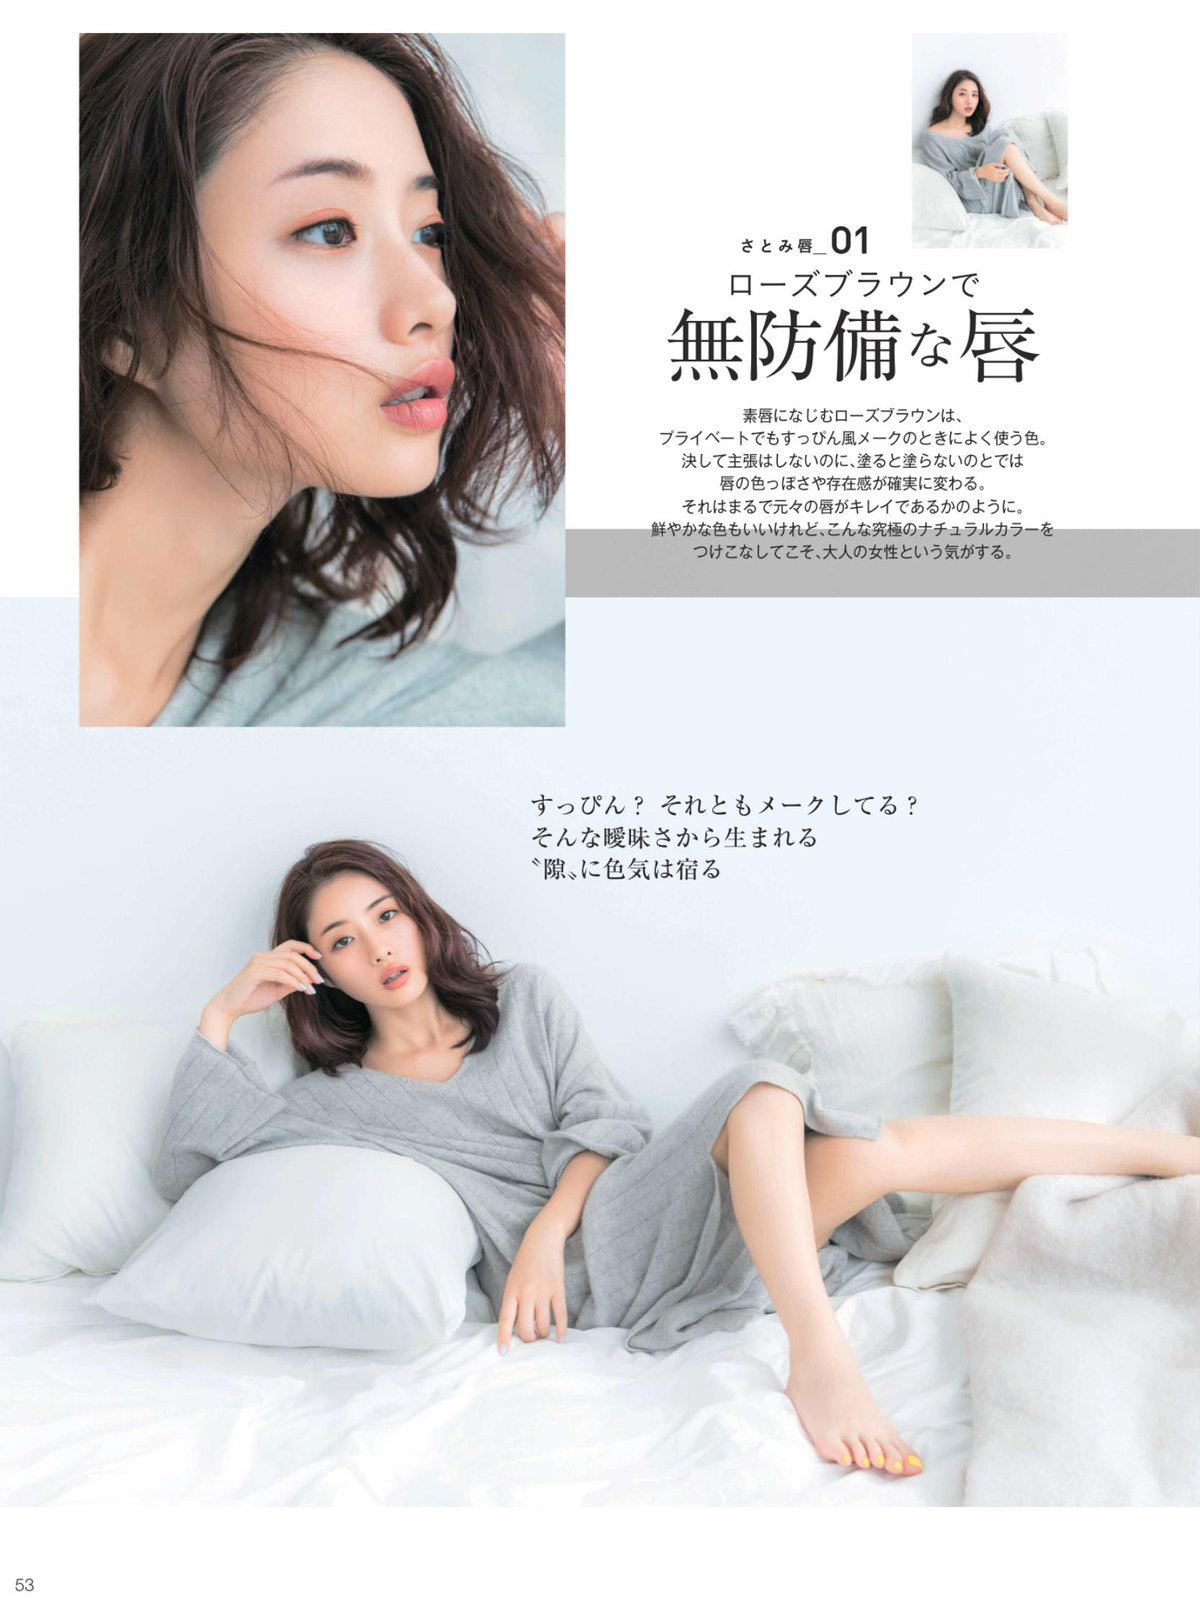 SATOMI on the bed